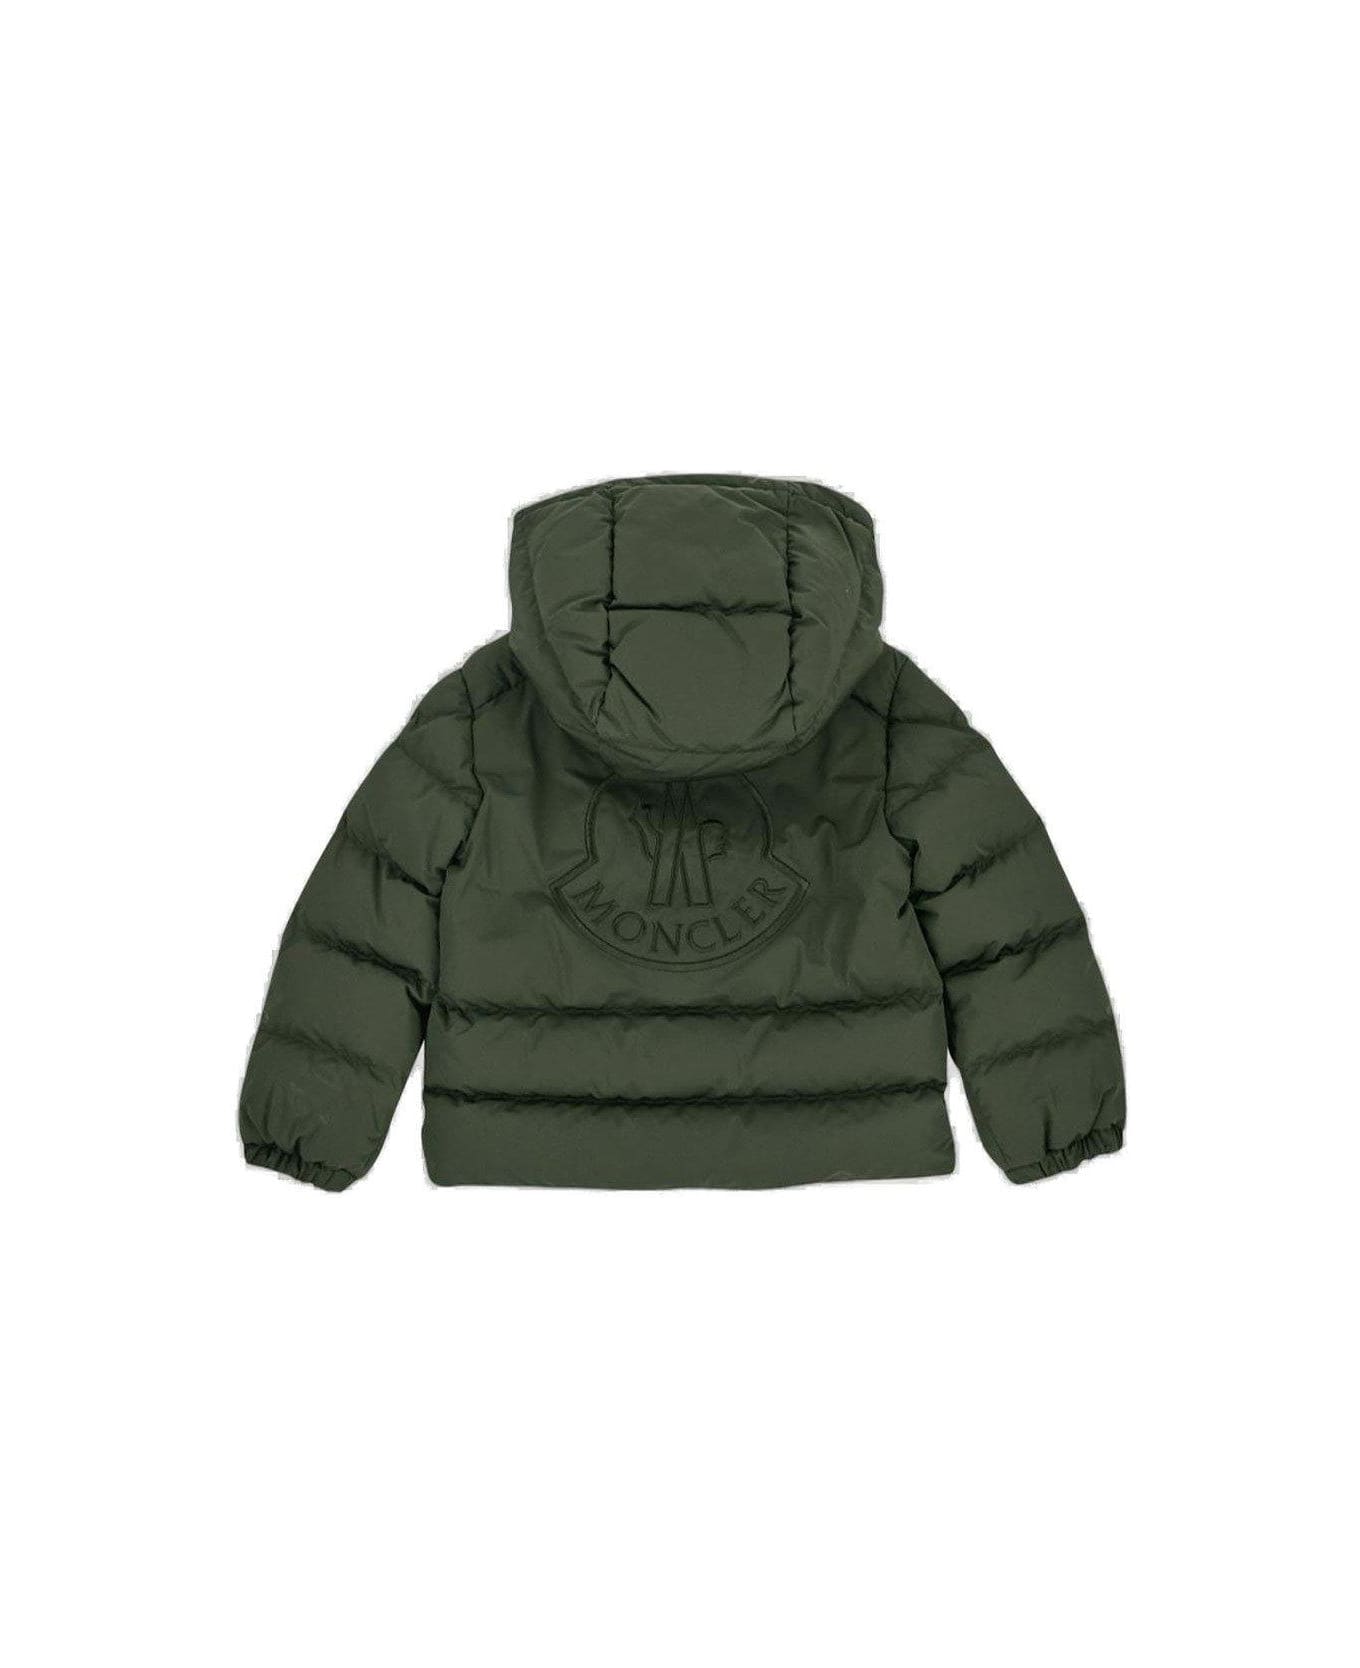 Moncler Logo Embroidered Hooded Padded Jacket - Green